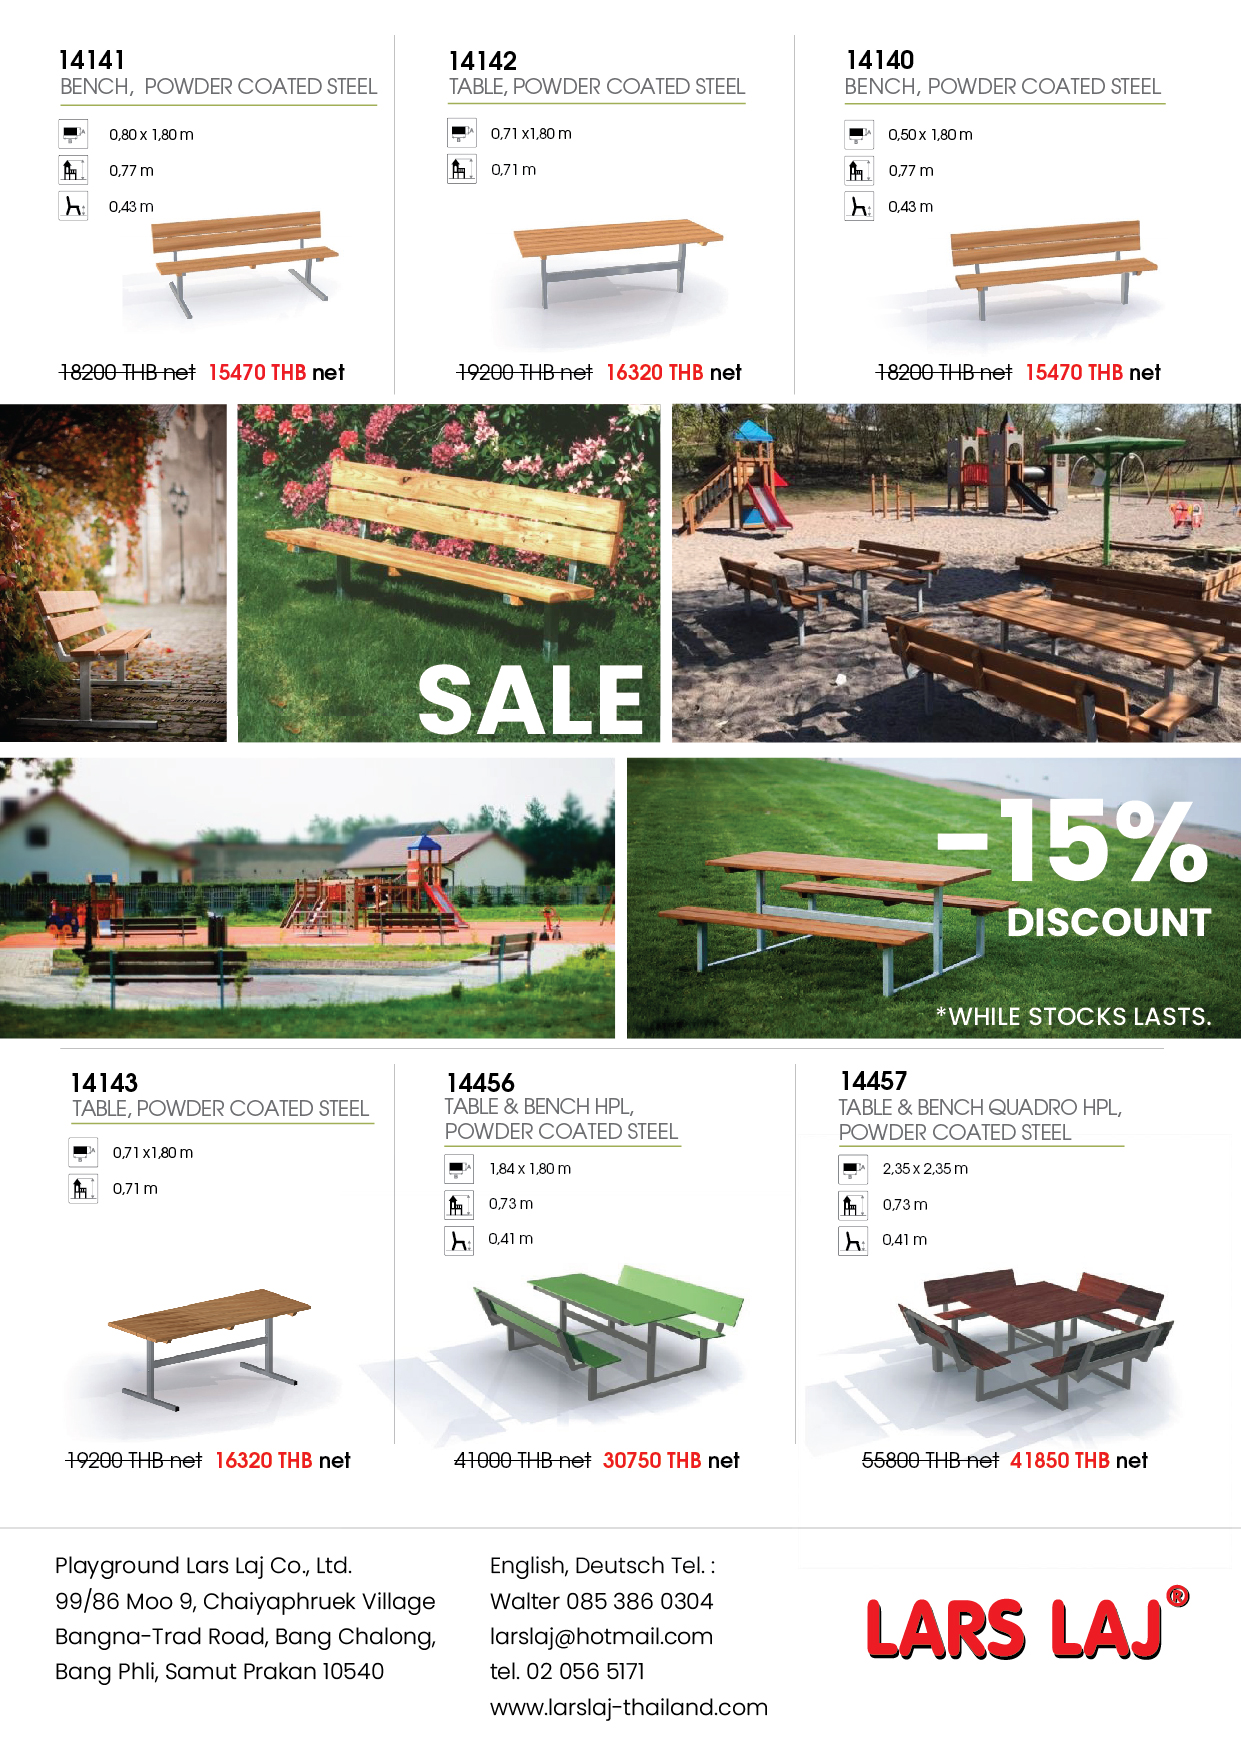 25% discount for tables and benches